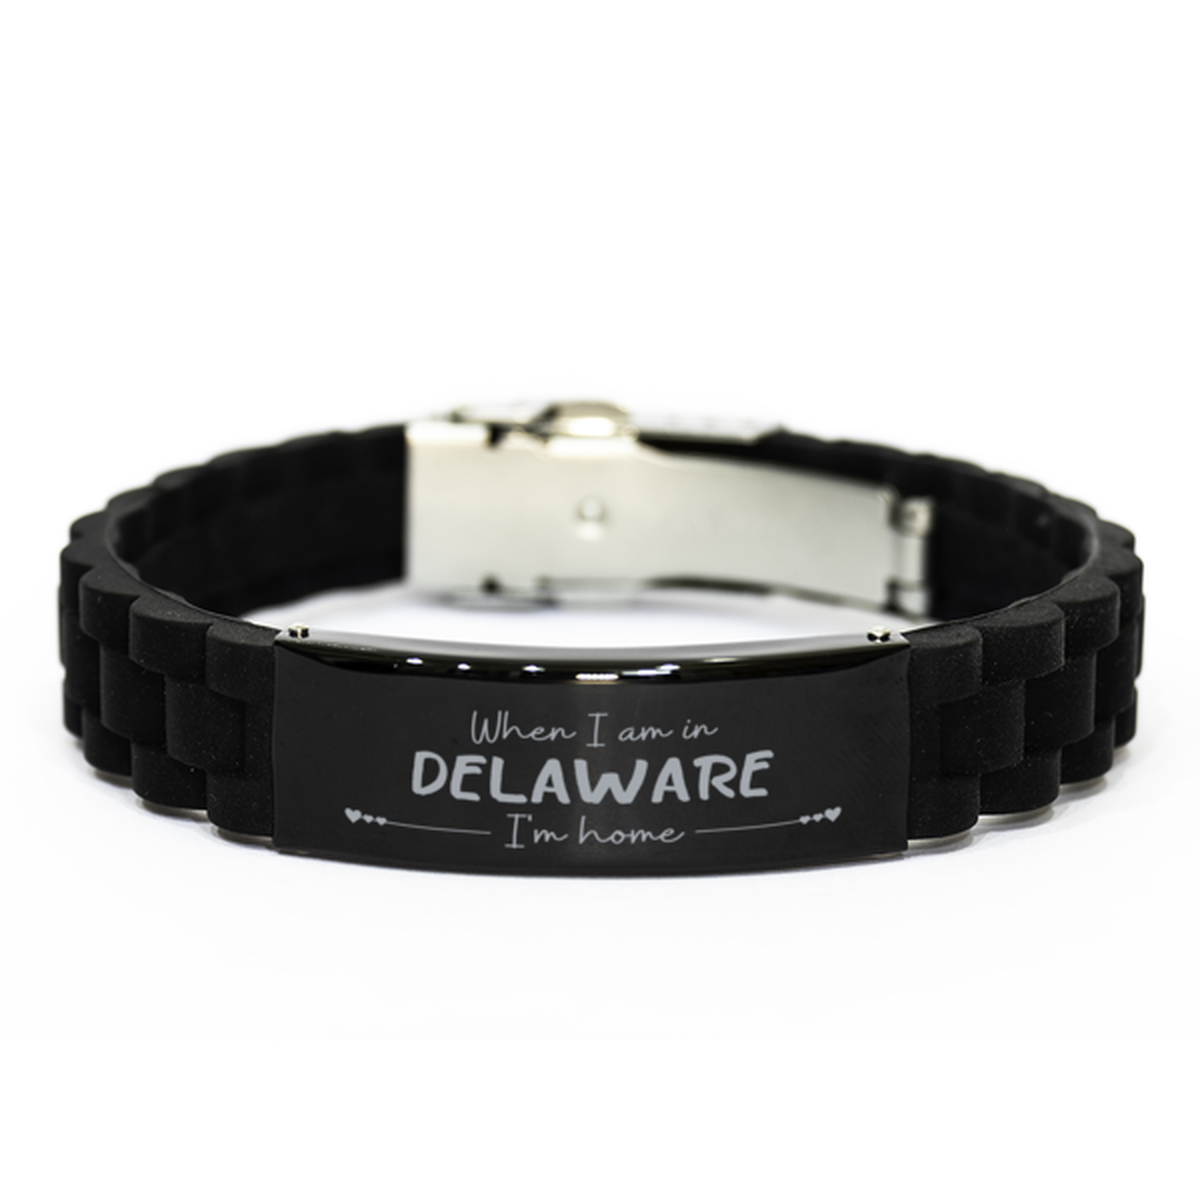 When I am in Delaware I'm home Black Glidelock Clasp Bracelet, Cheap Gifts For Delaware, State Delaware Birthday Gifts for Friends Coworker